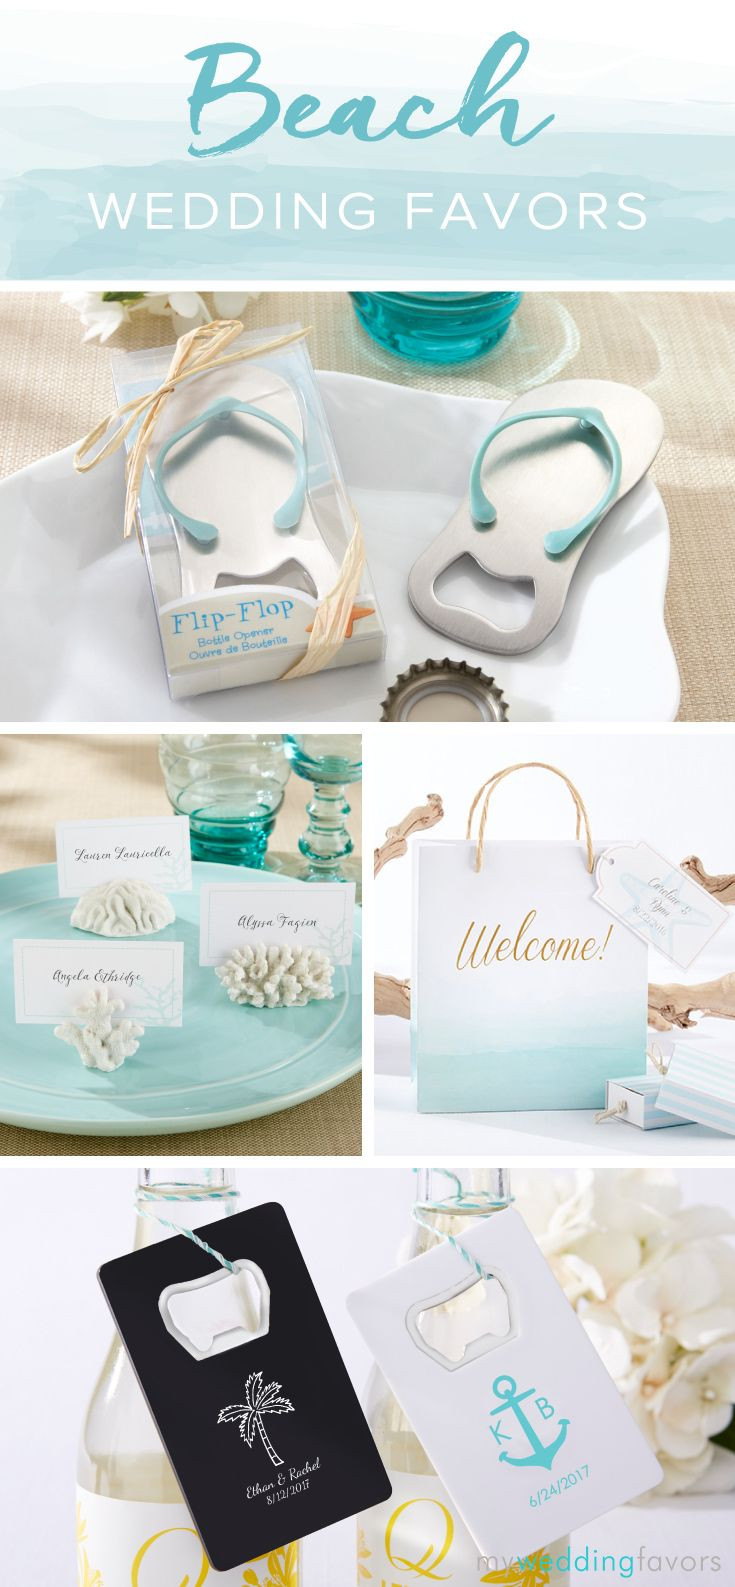 Beach Theme Wedding Favors
 Your guests will never for your special day with these